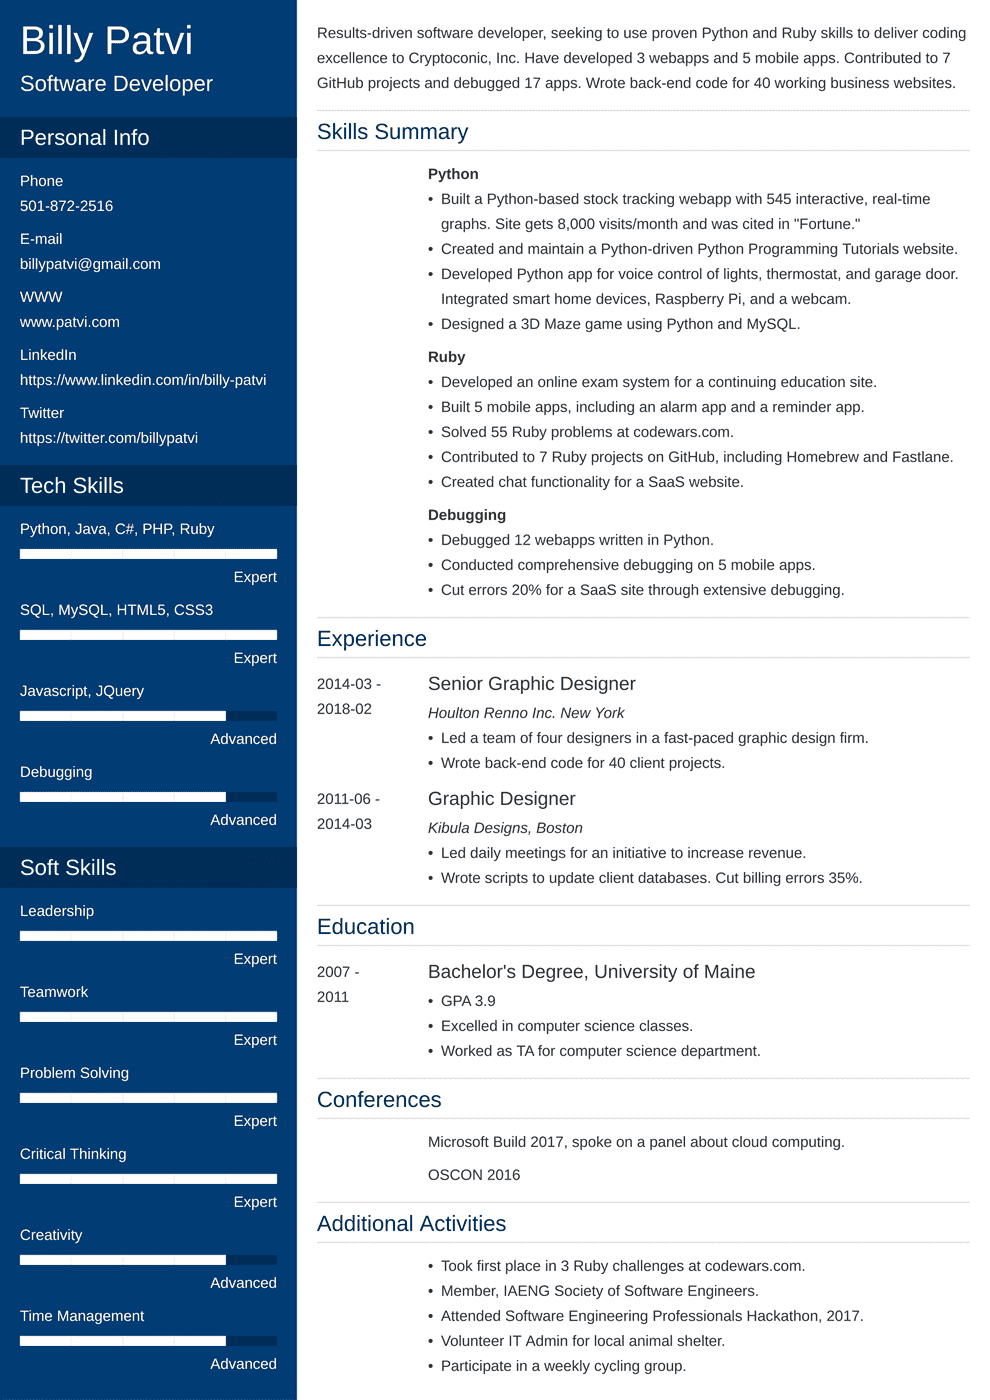 Career Change Resume Example (Guide, Samples & Tips)